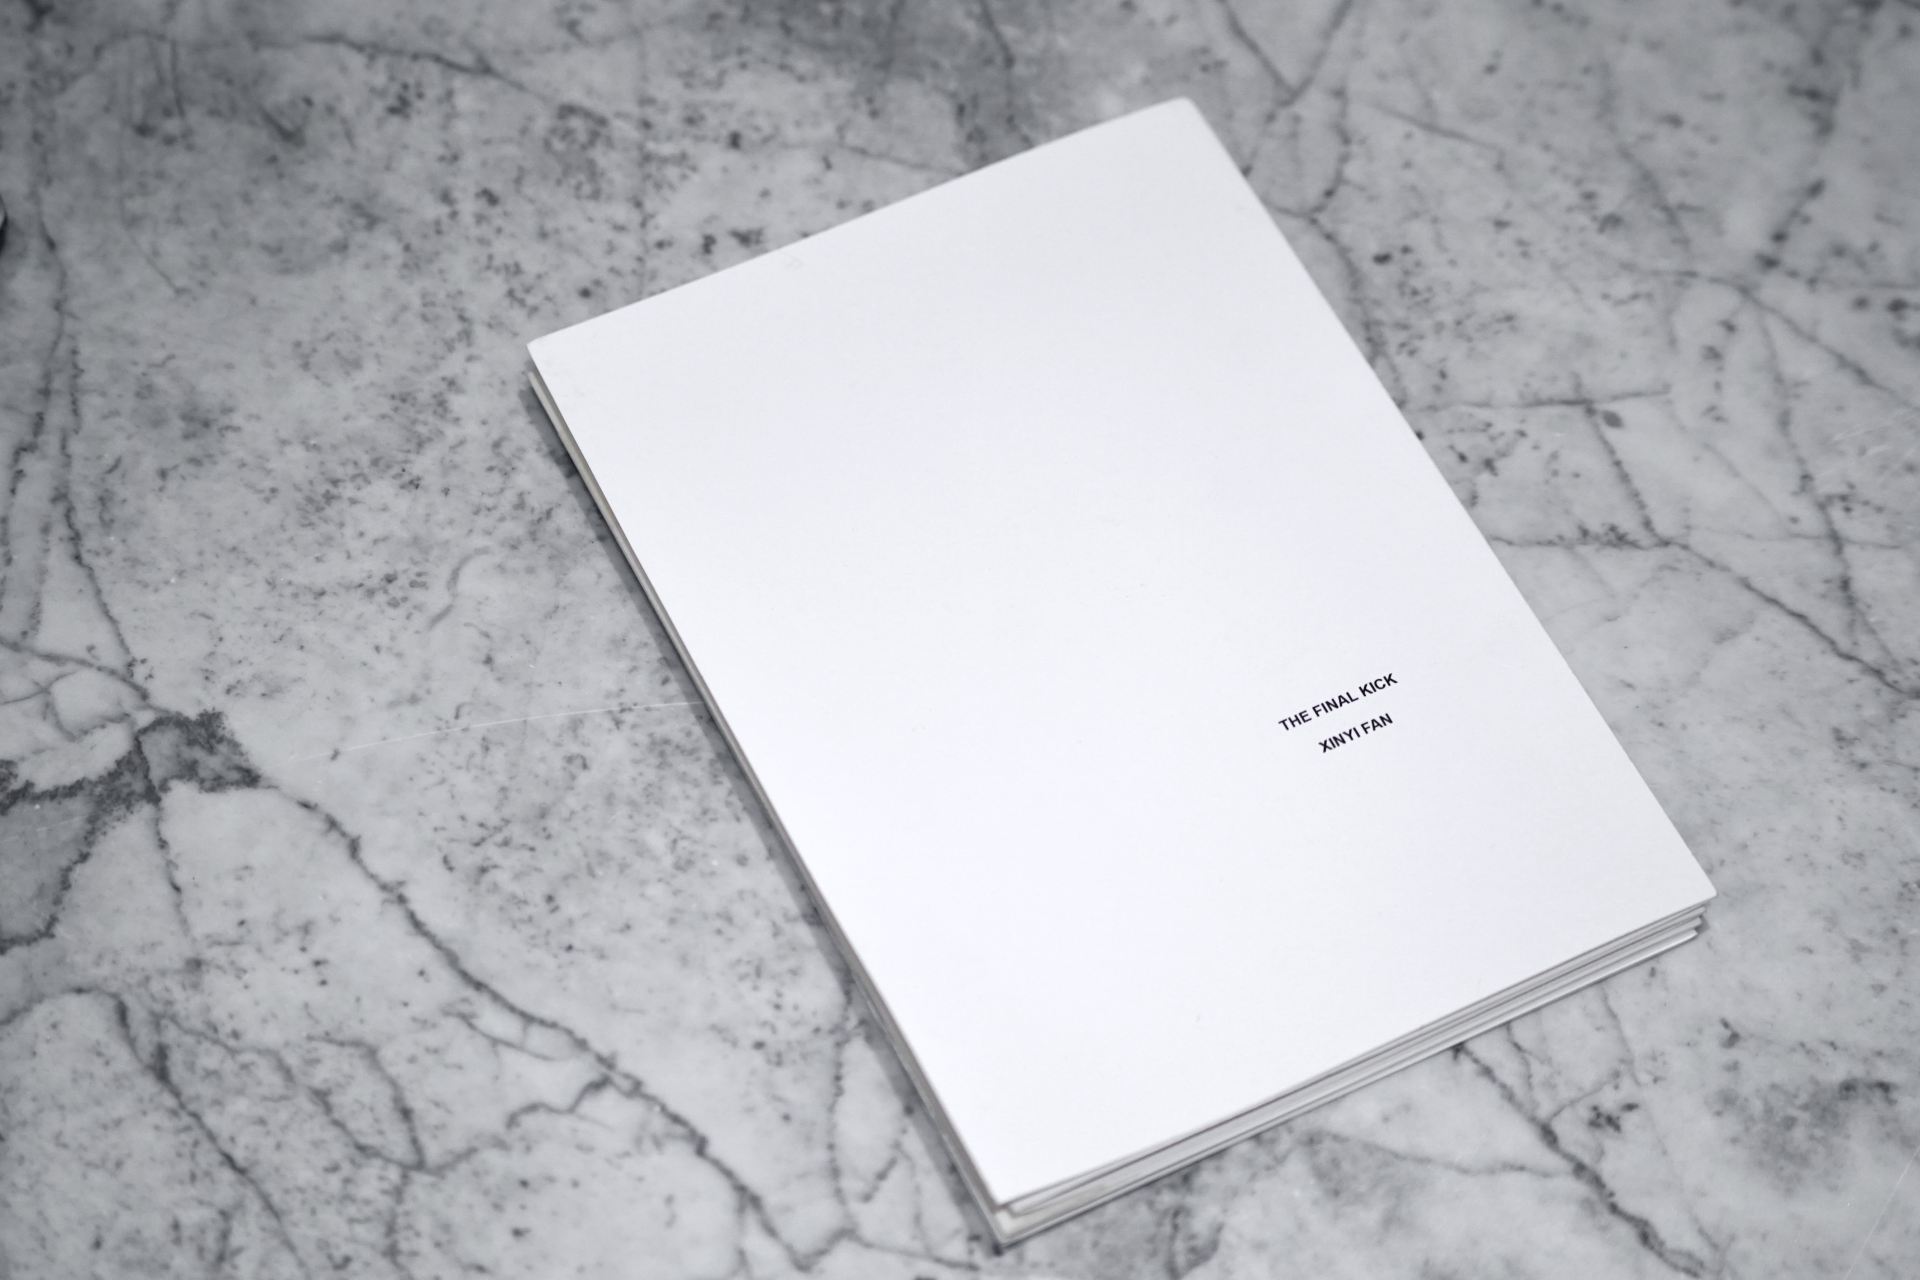 An image of the front cover of a white book on marble.